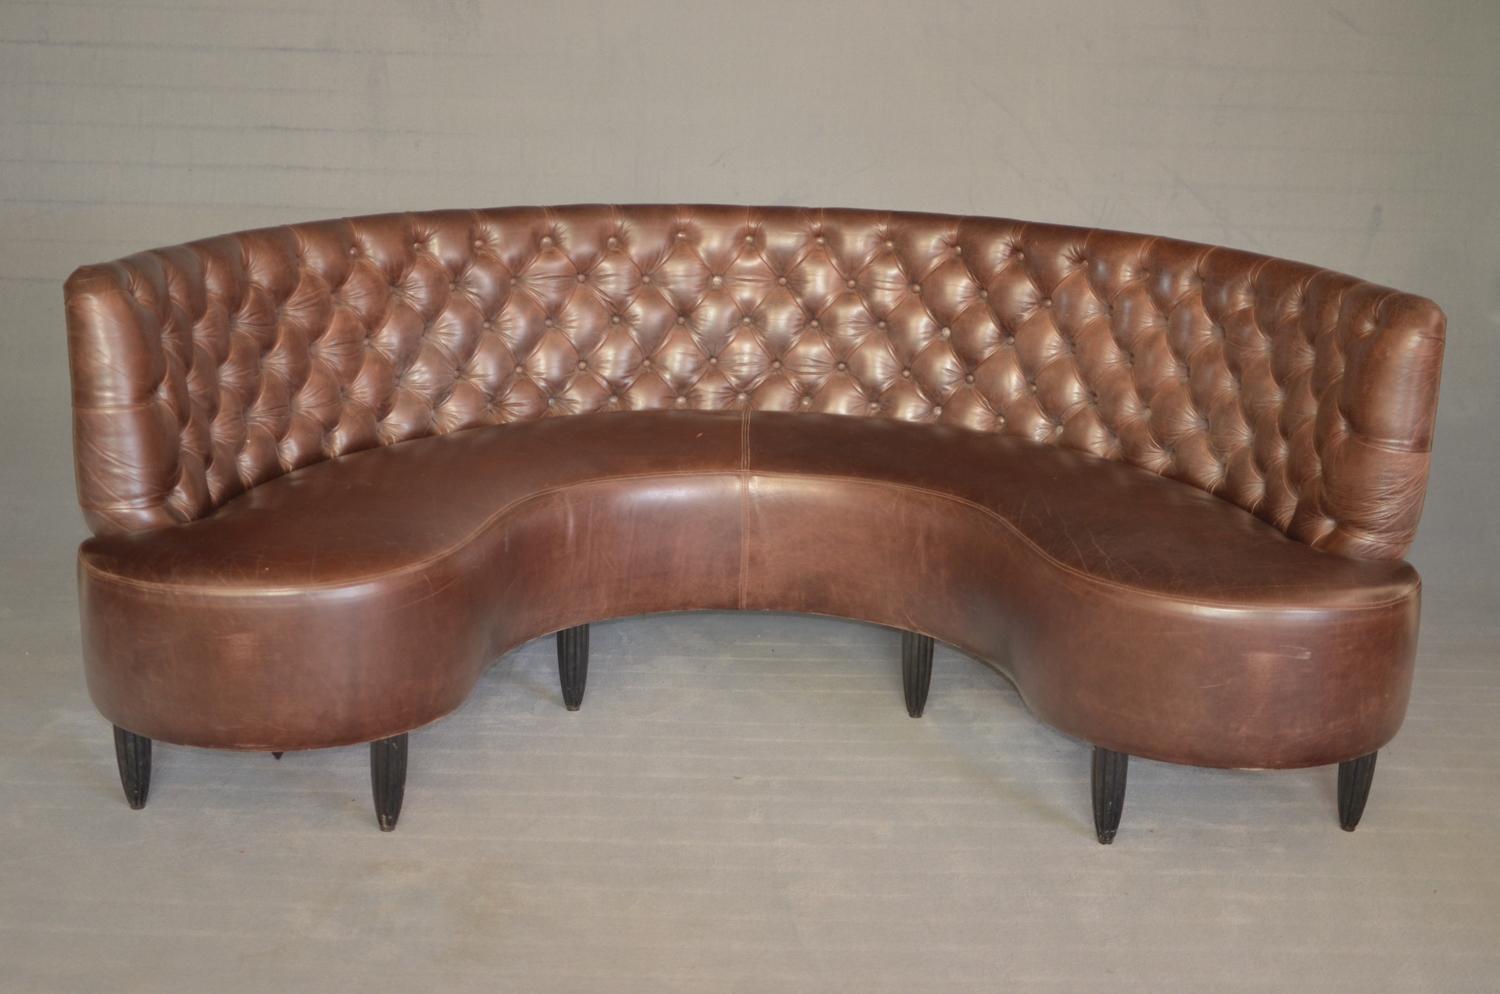 Chesterfield sofa in the shape of a dark brown English-style horseshoe dating back to 1920. The sofa features a quilted backrest typical of the Chesterfield while the back part appears to be in lateral studded velvet.